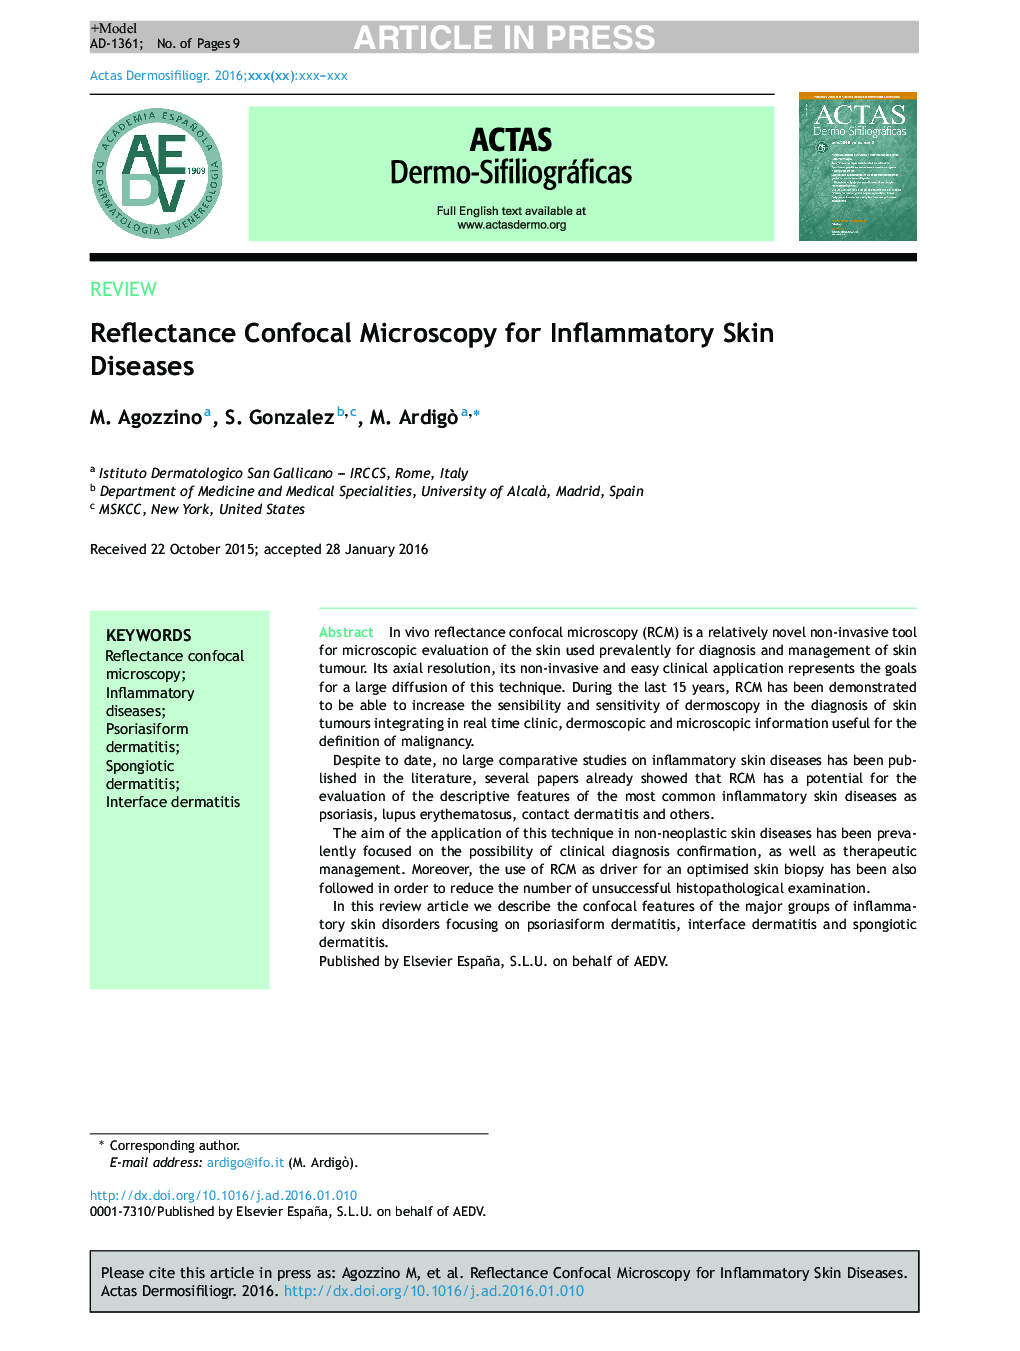 Reflectance Confocal Microscopy for Inflammatory Skin Diseases